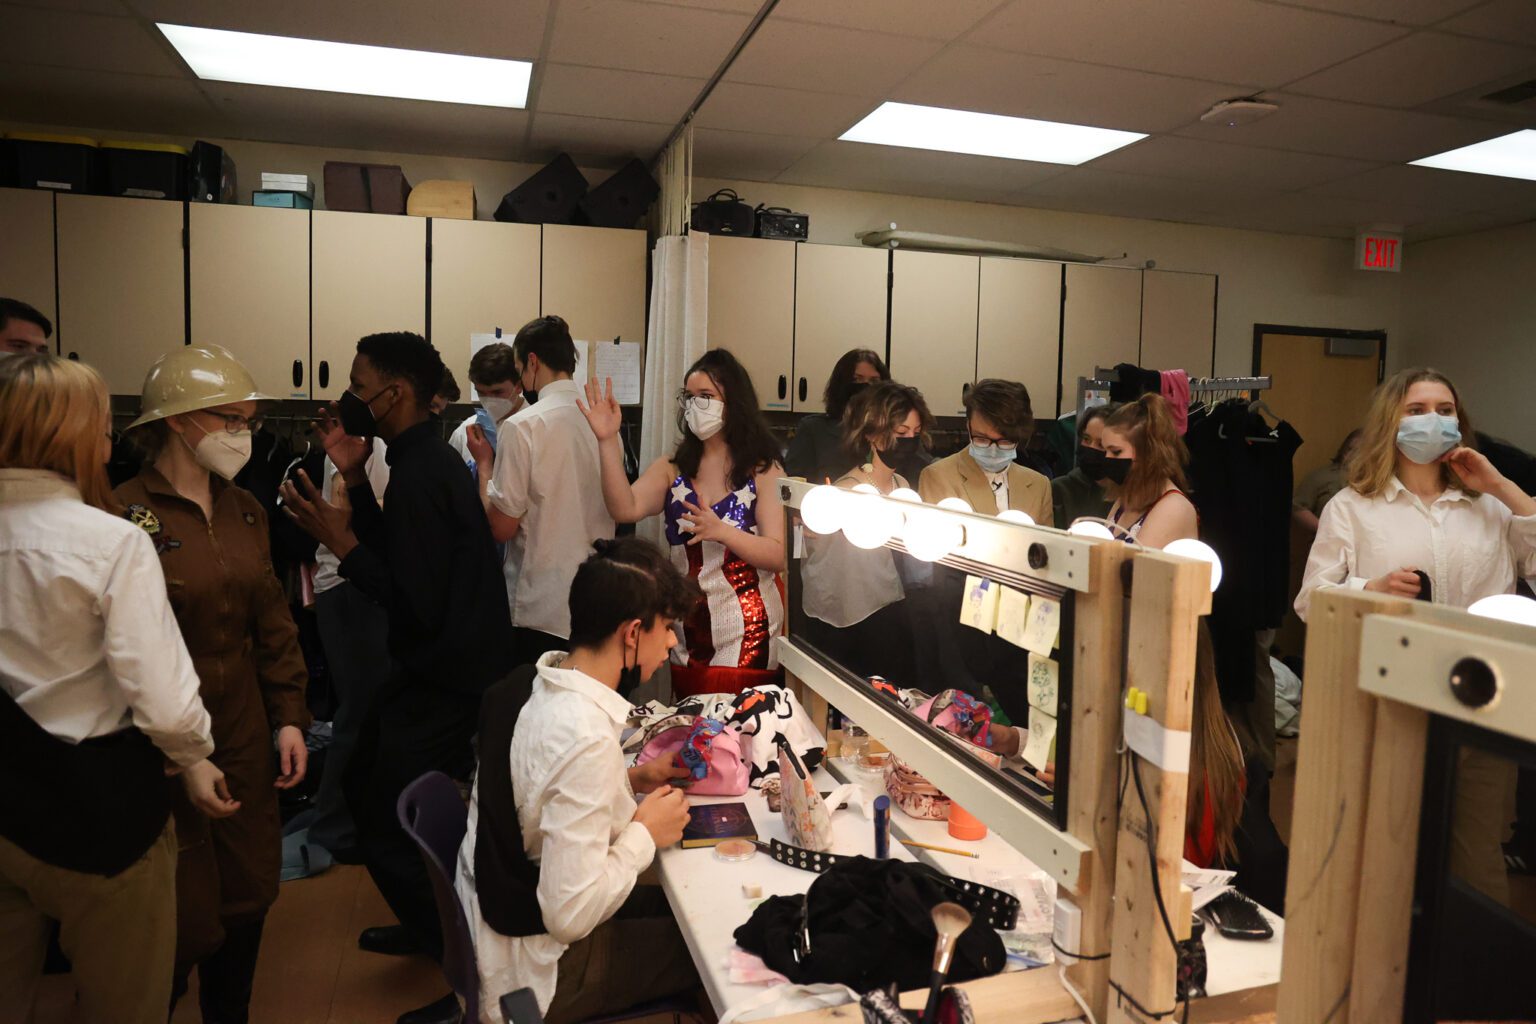 The joyful chaos of intermission unfolds with hair and makeup touch-ups